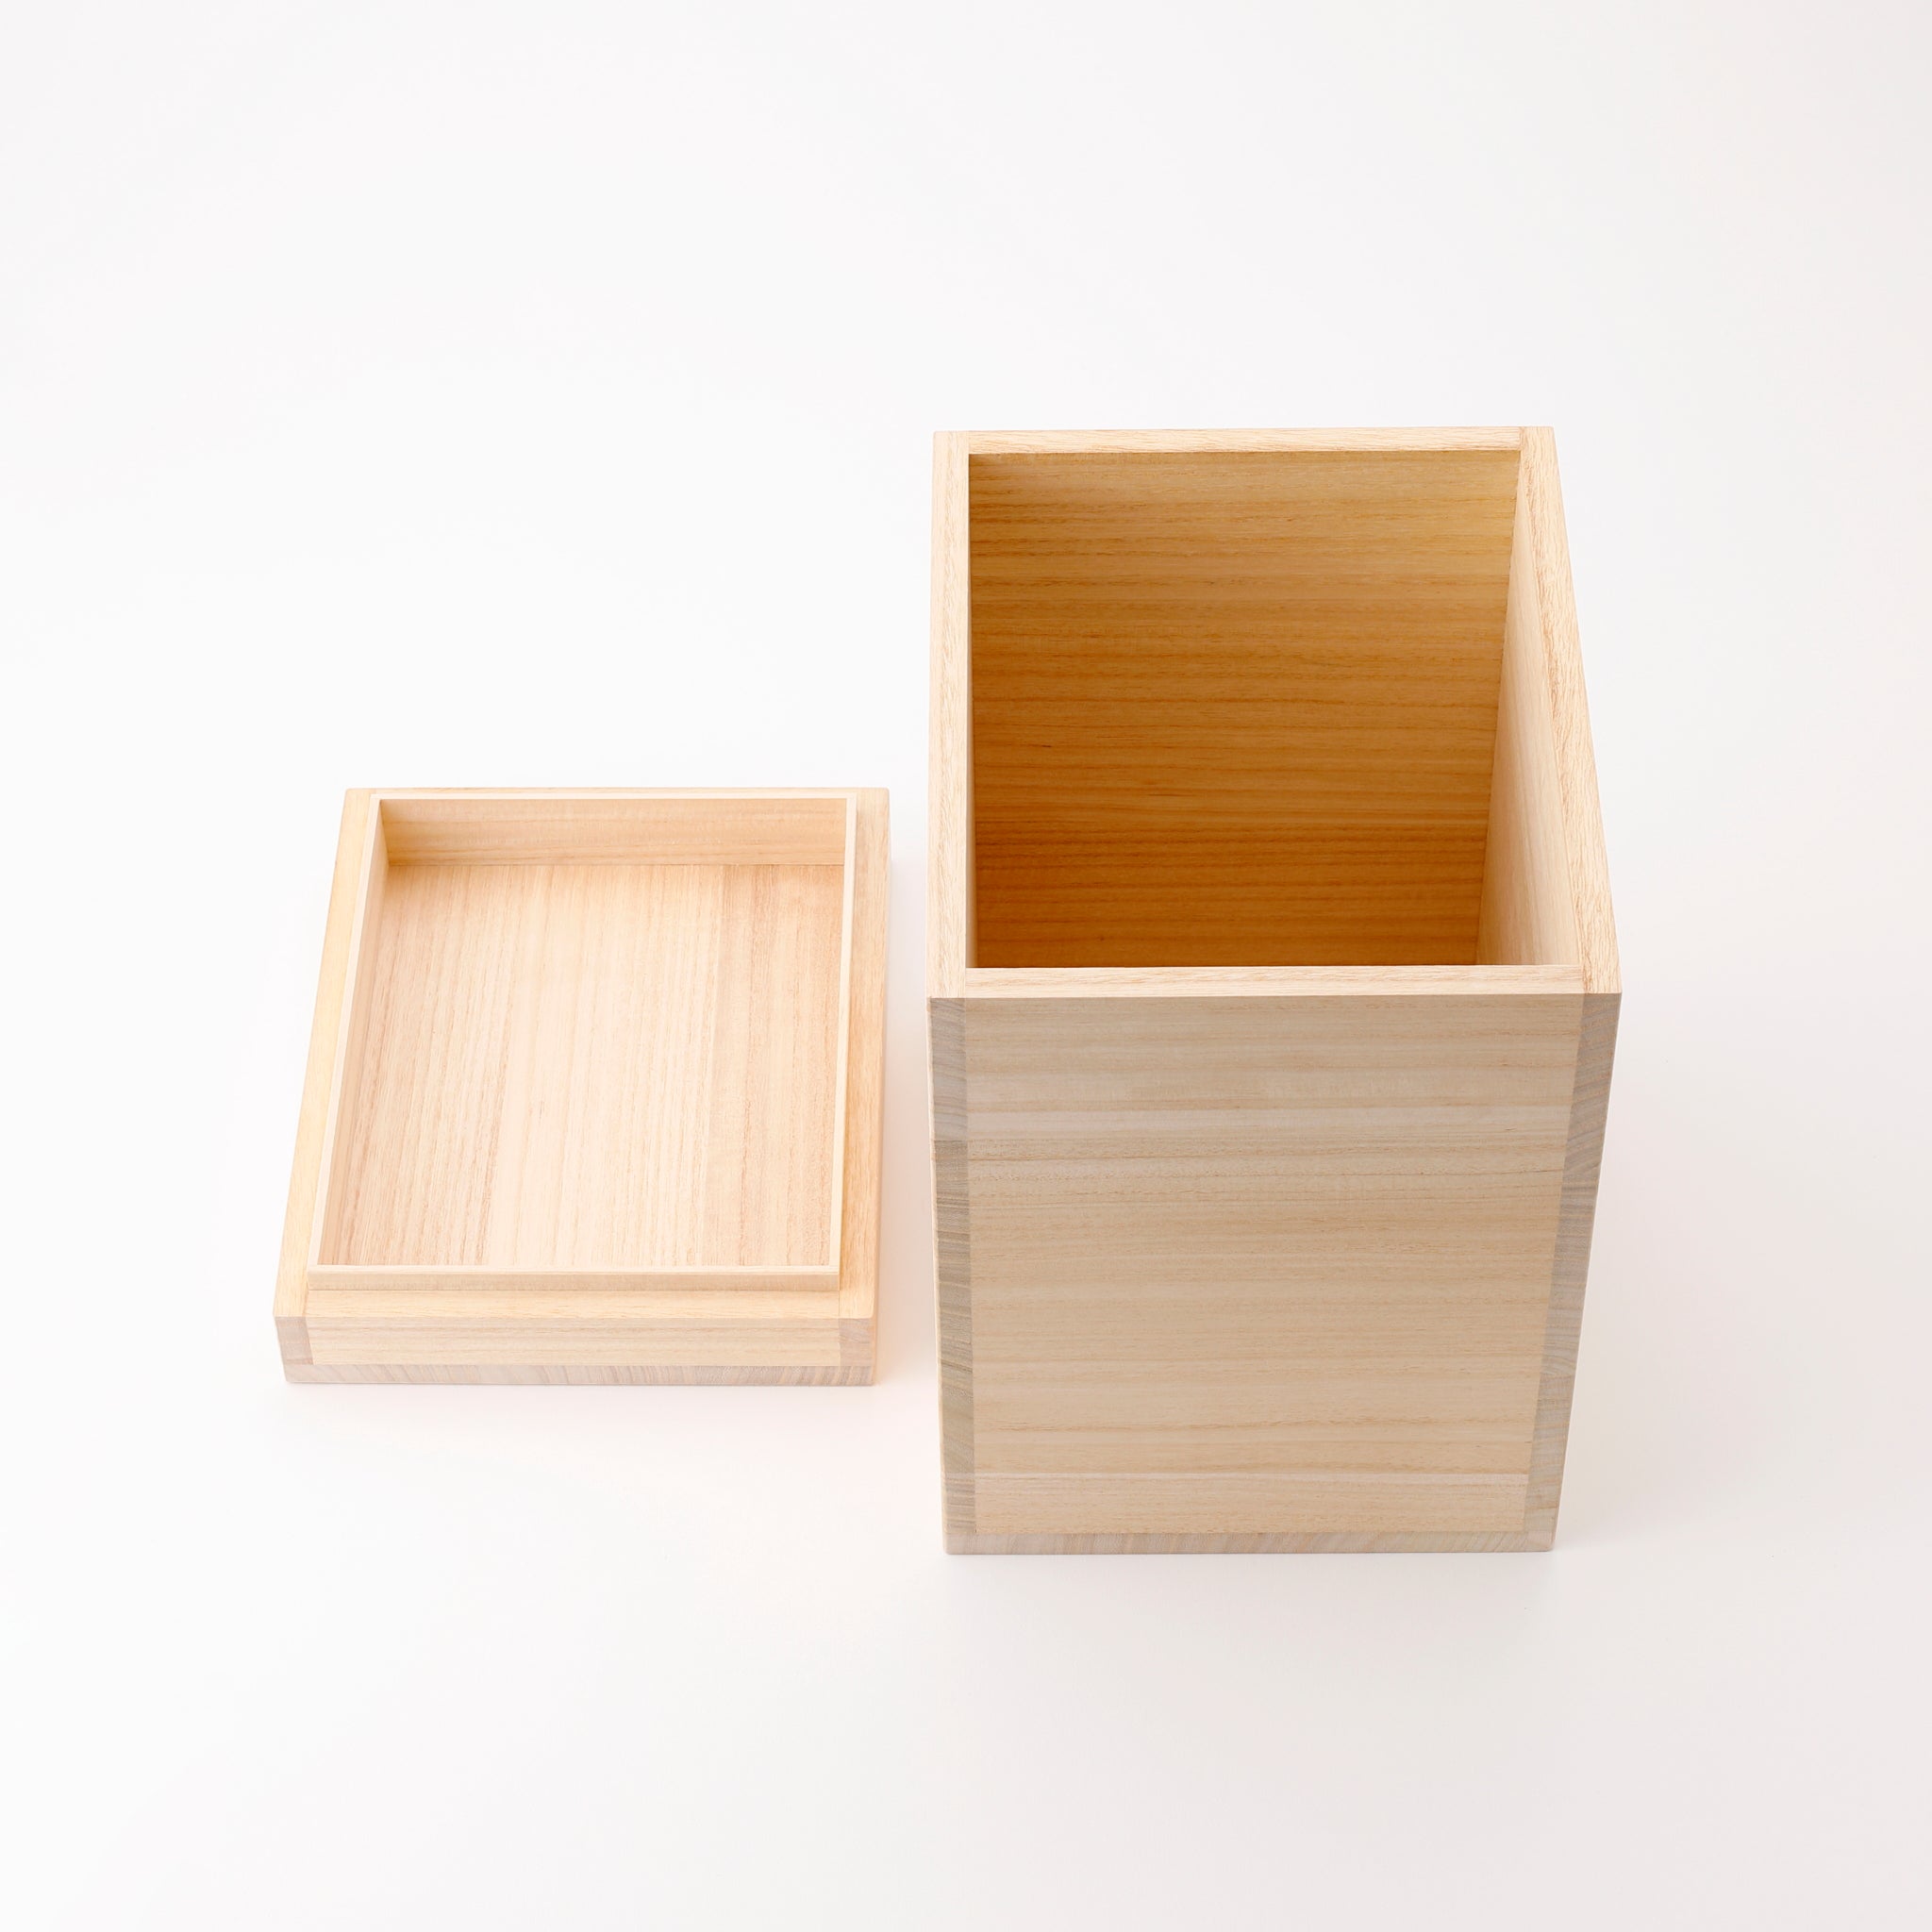 Wooden Box for Food Storage